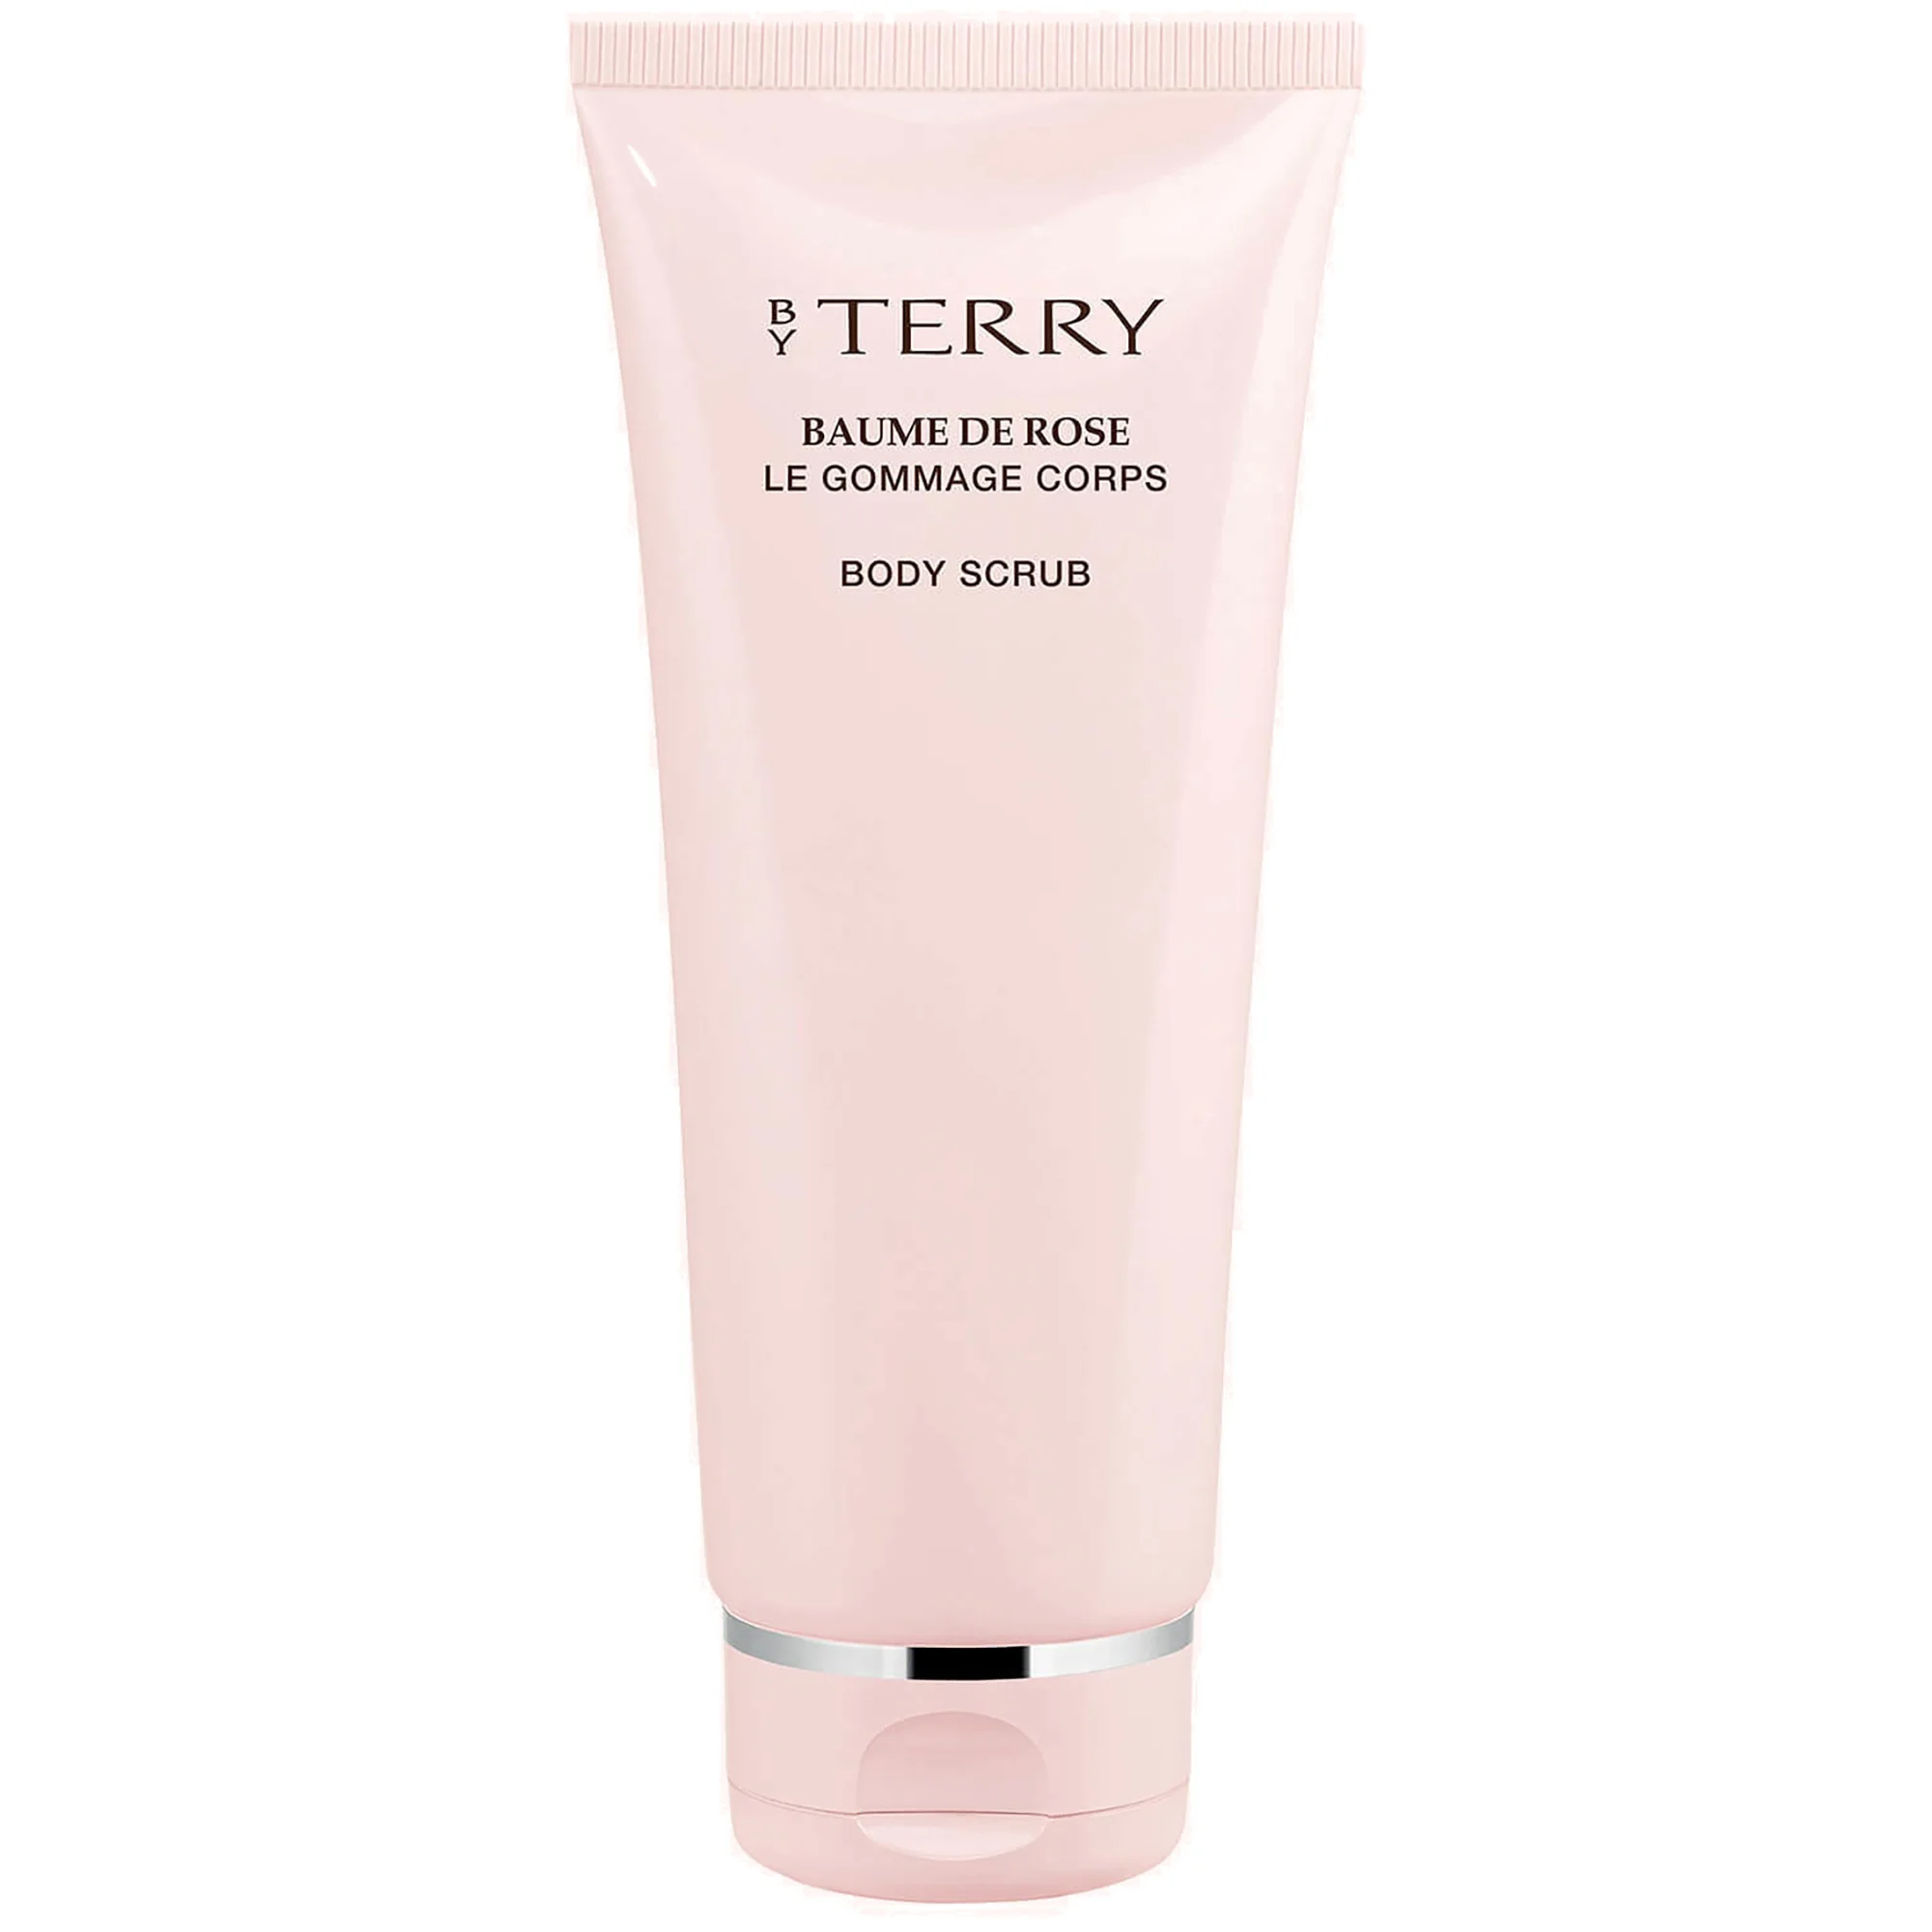 By Terry Baume de Rose Le Gommage Corps Body Scrub Image 1